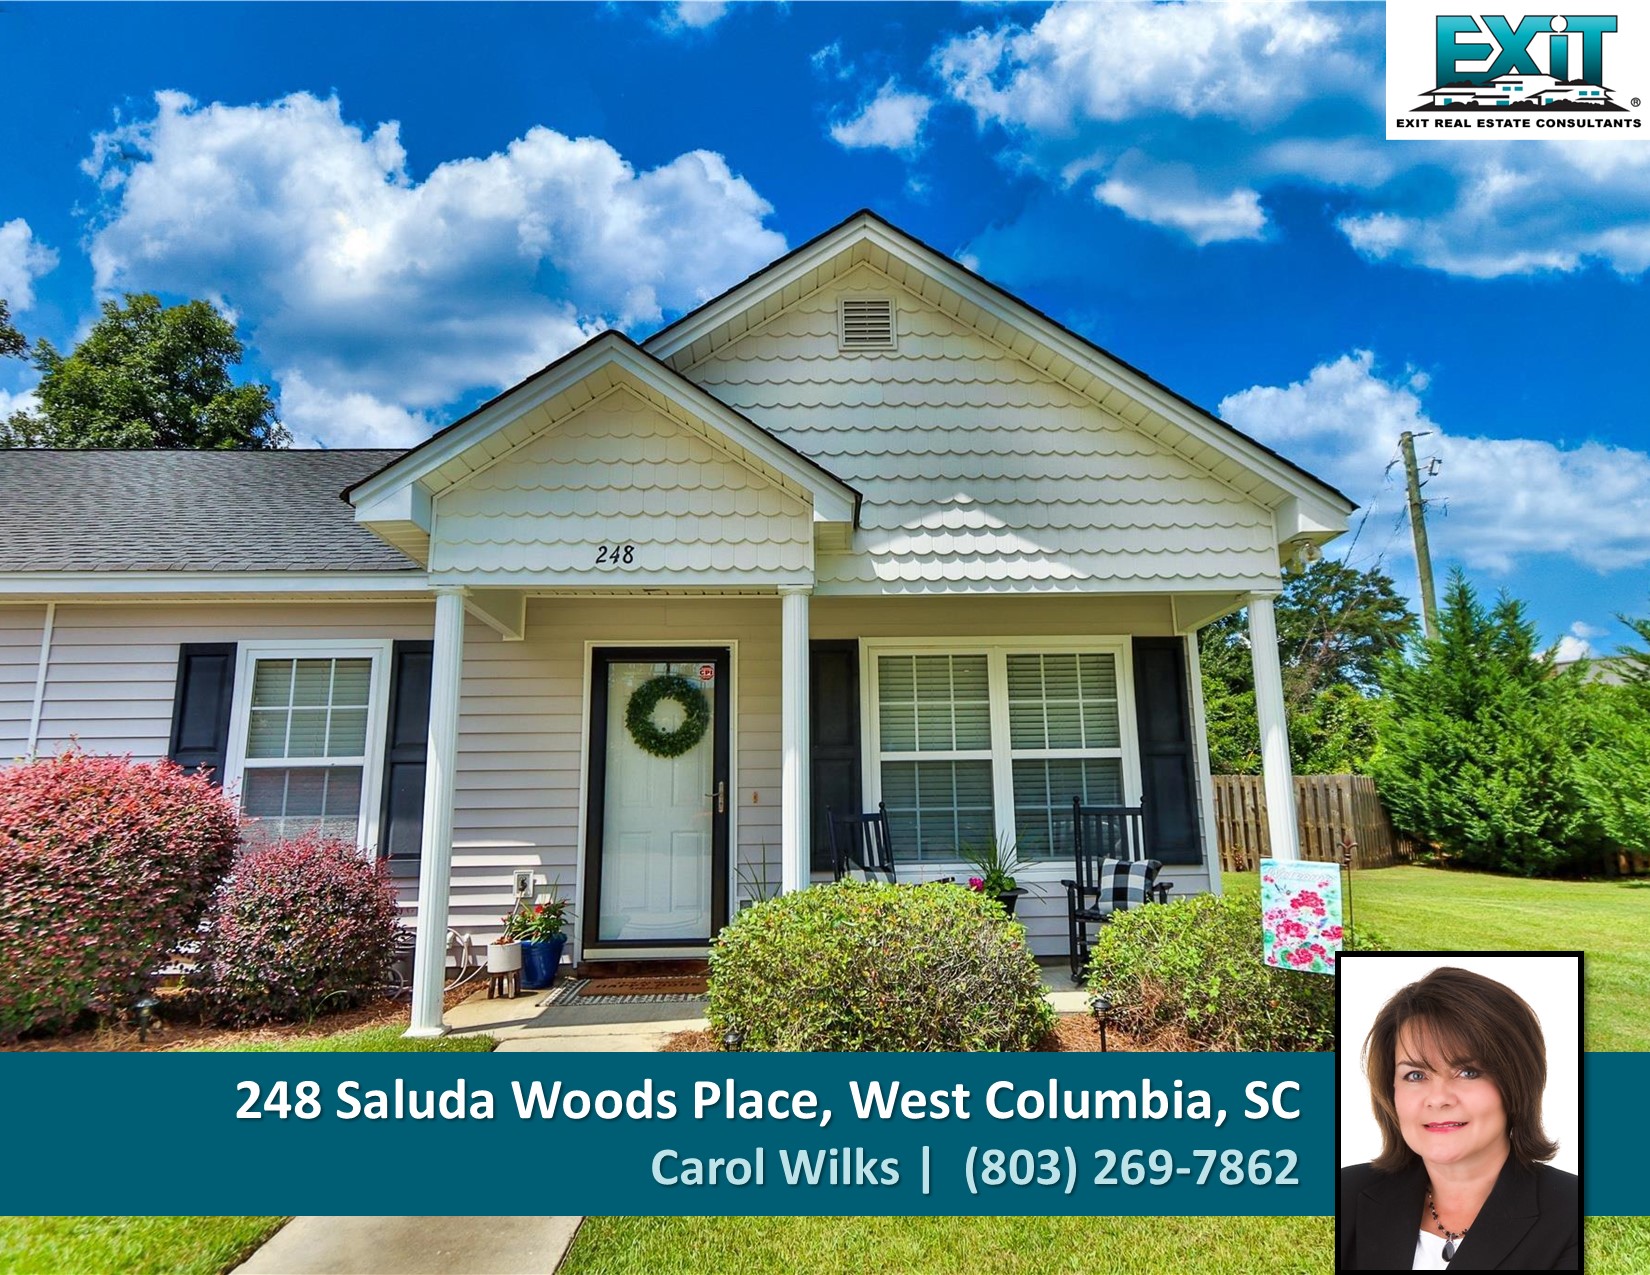 Just listed in Saluda Commons - West Columbia